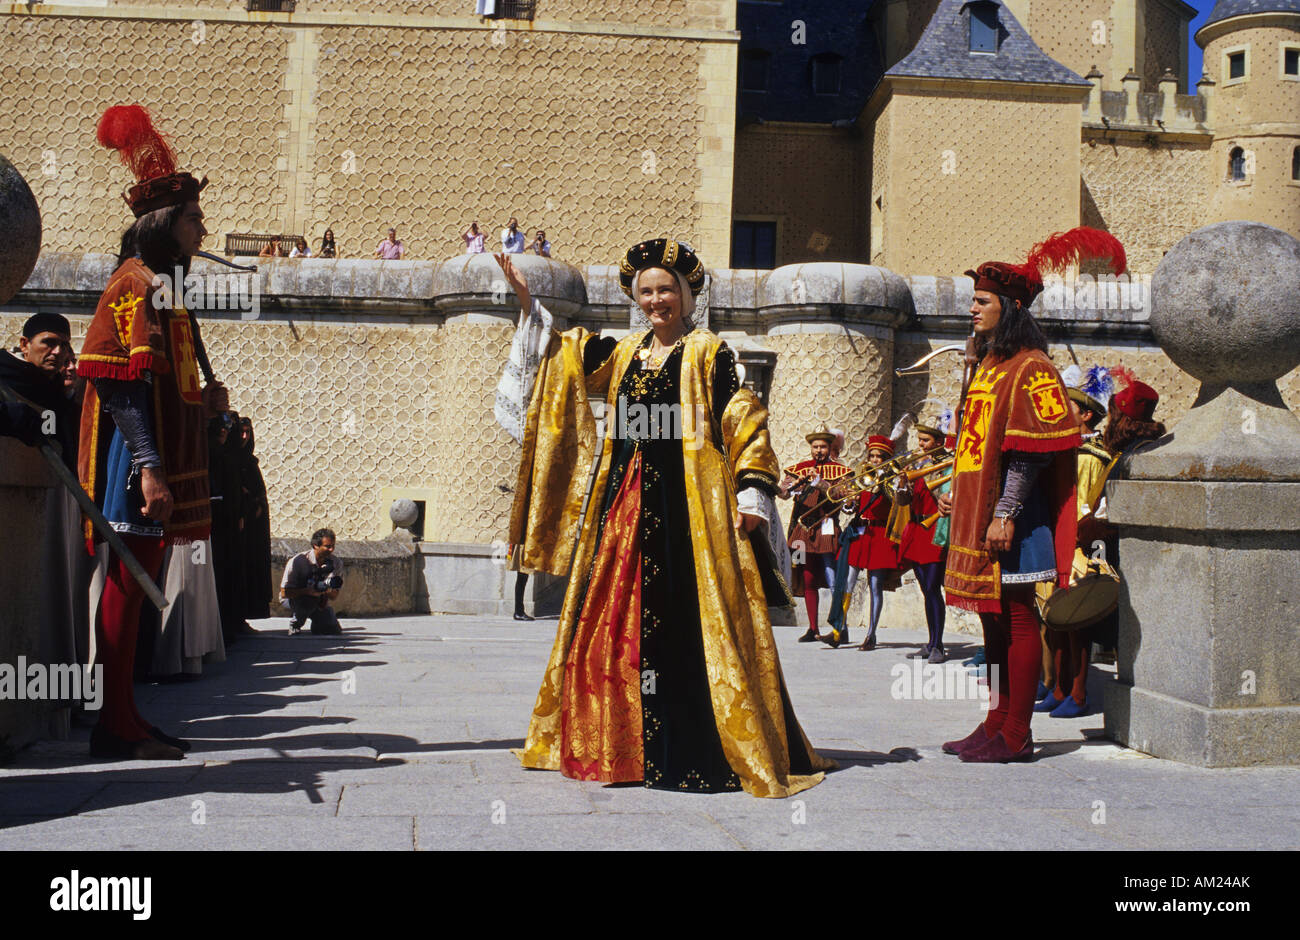 Coronation of Isabella I of Castile in the Alcazar castle MIDDLE AGES FESTIVAL in SEGOVIA Spain Stock Photo